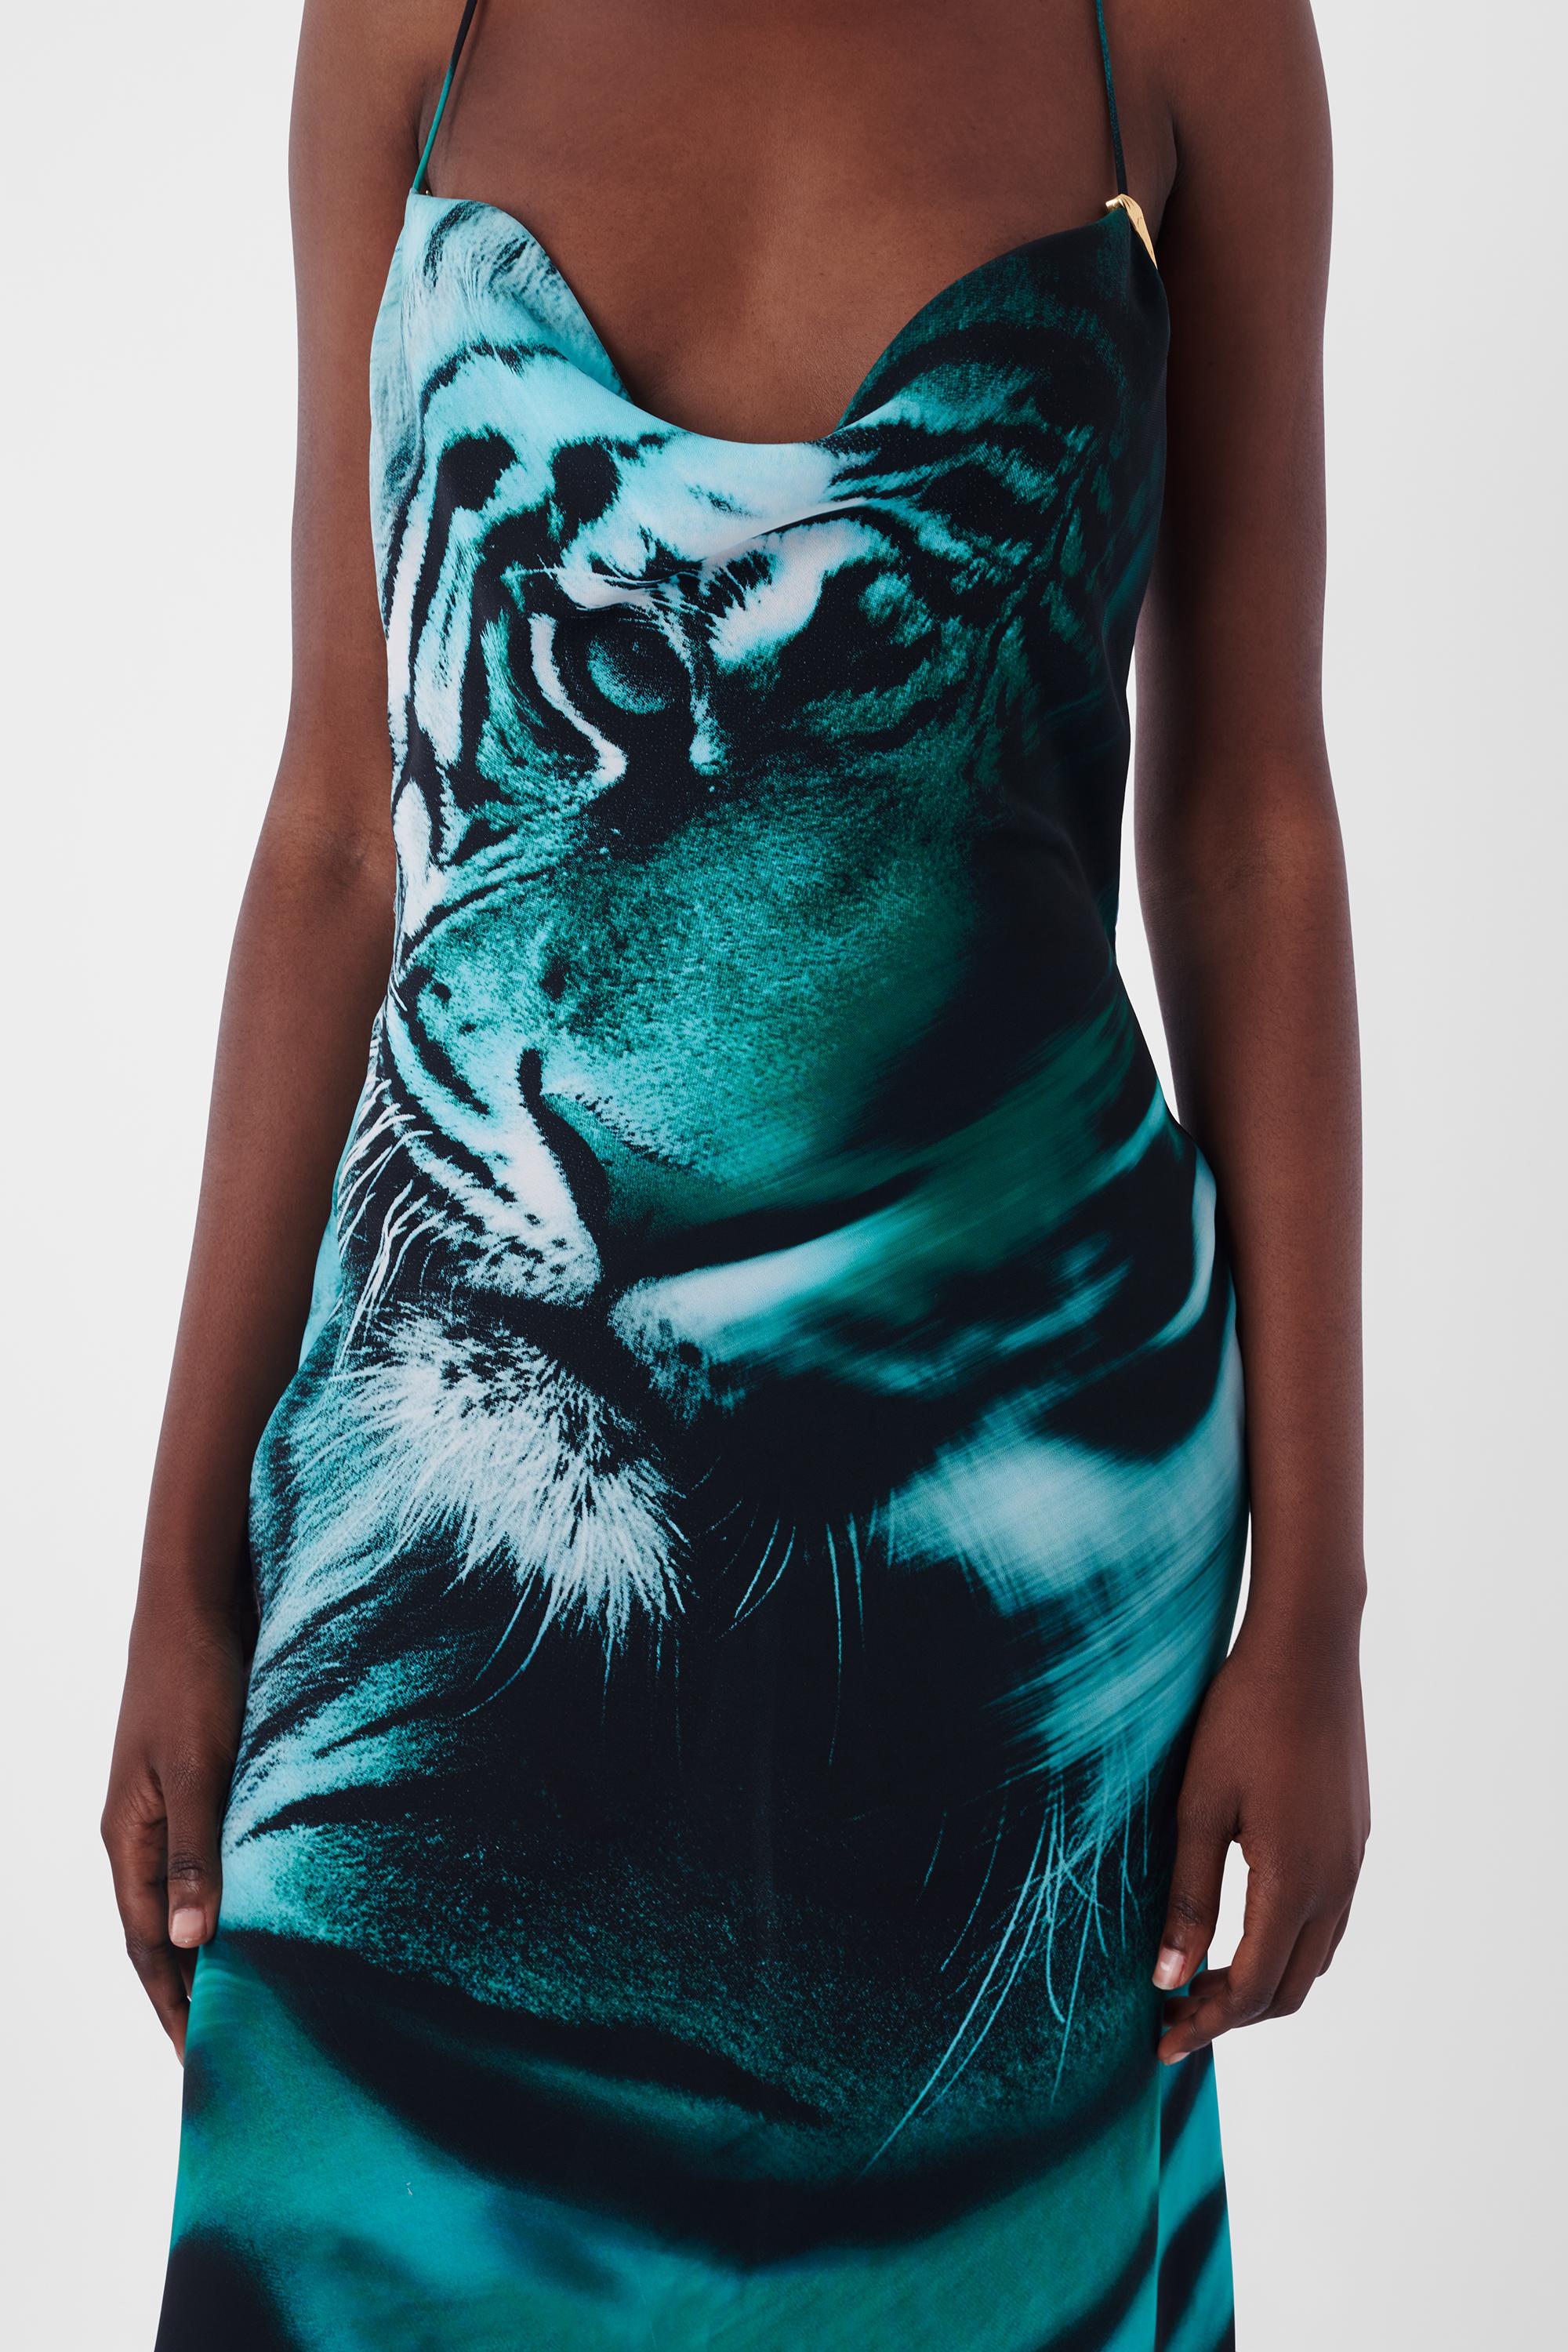 S/S 2022 Blue Tiger Dress In Excellent Condition For Sale In London, GB